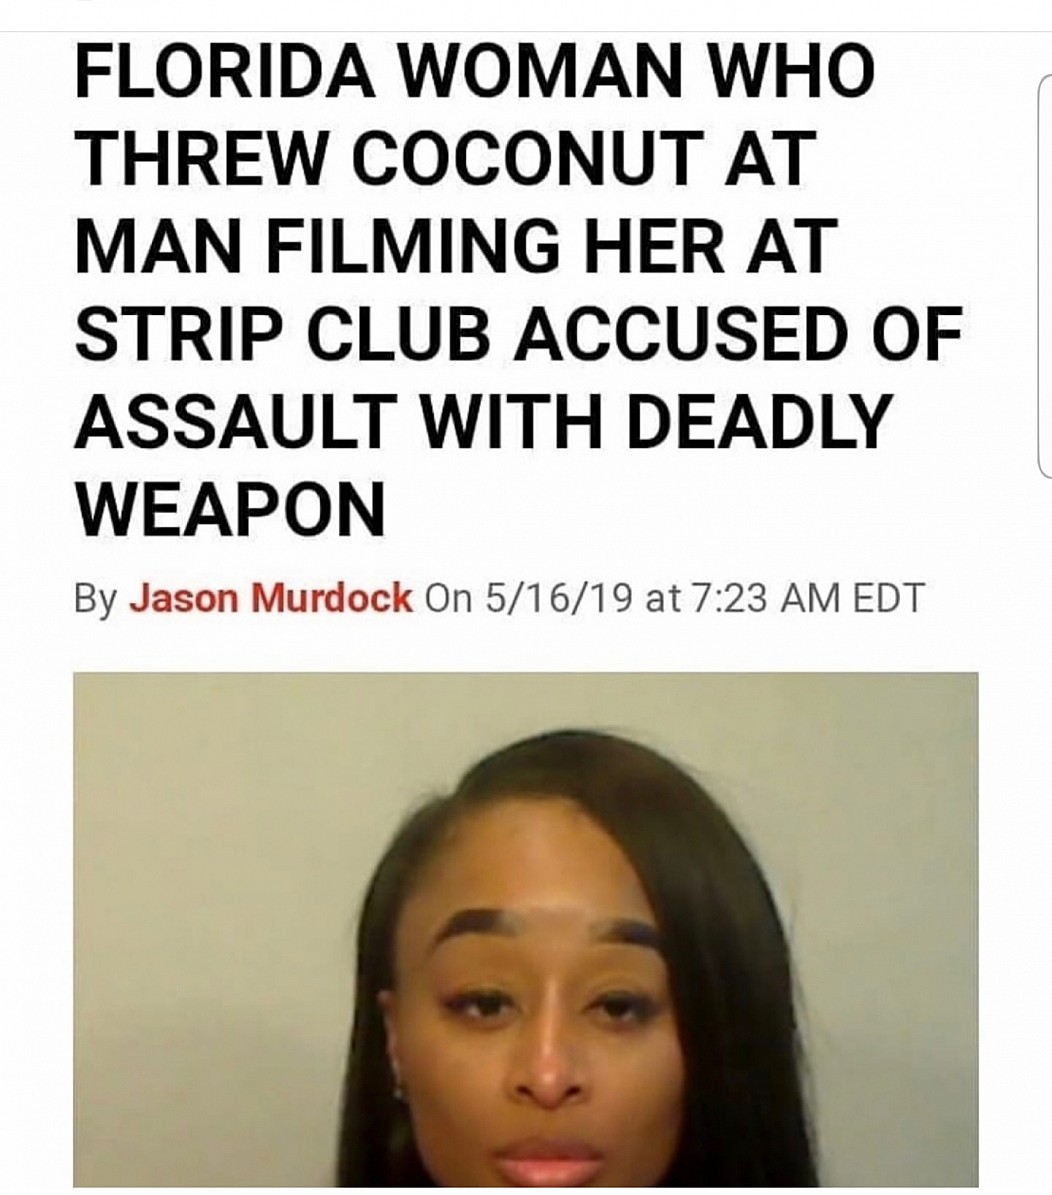 random pics - hairstyle - Florida Woman Who Threw Coconut At Man Filming Her At Strip Club Accused Of Assault With Deadly Weapon By Jason Murdock On 51619 at Edt